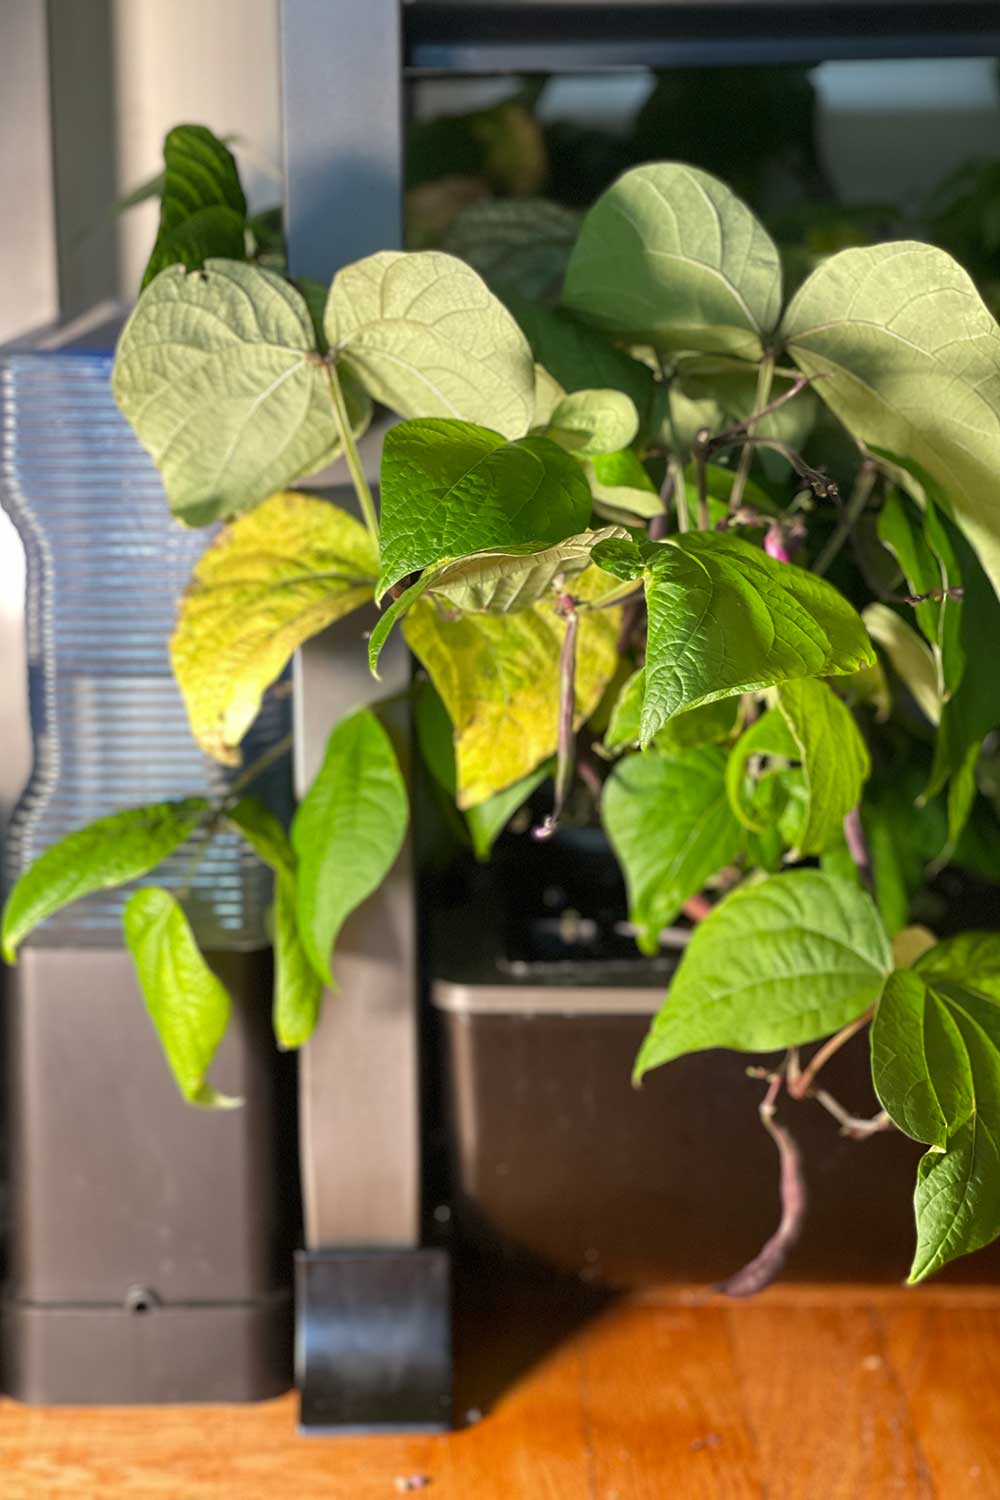 bush-bean-leaves-turning-yellow-from-over-fertilizing-too-much-nitrogen